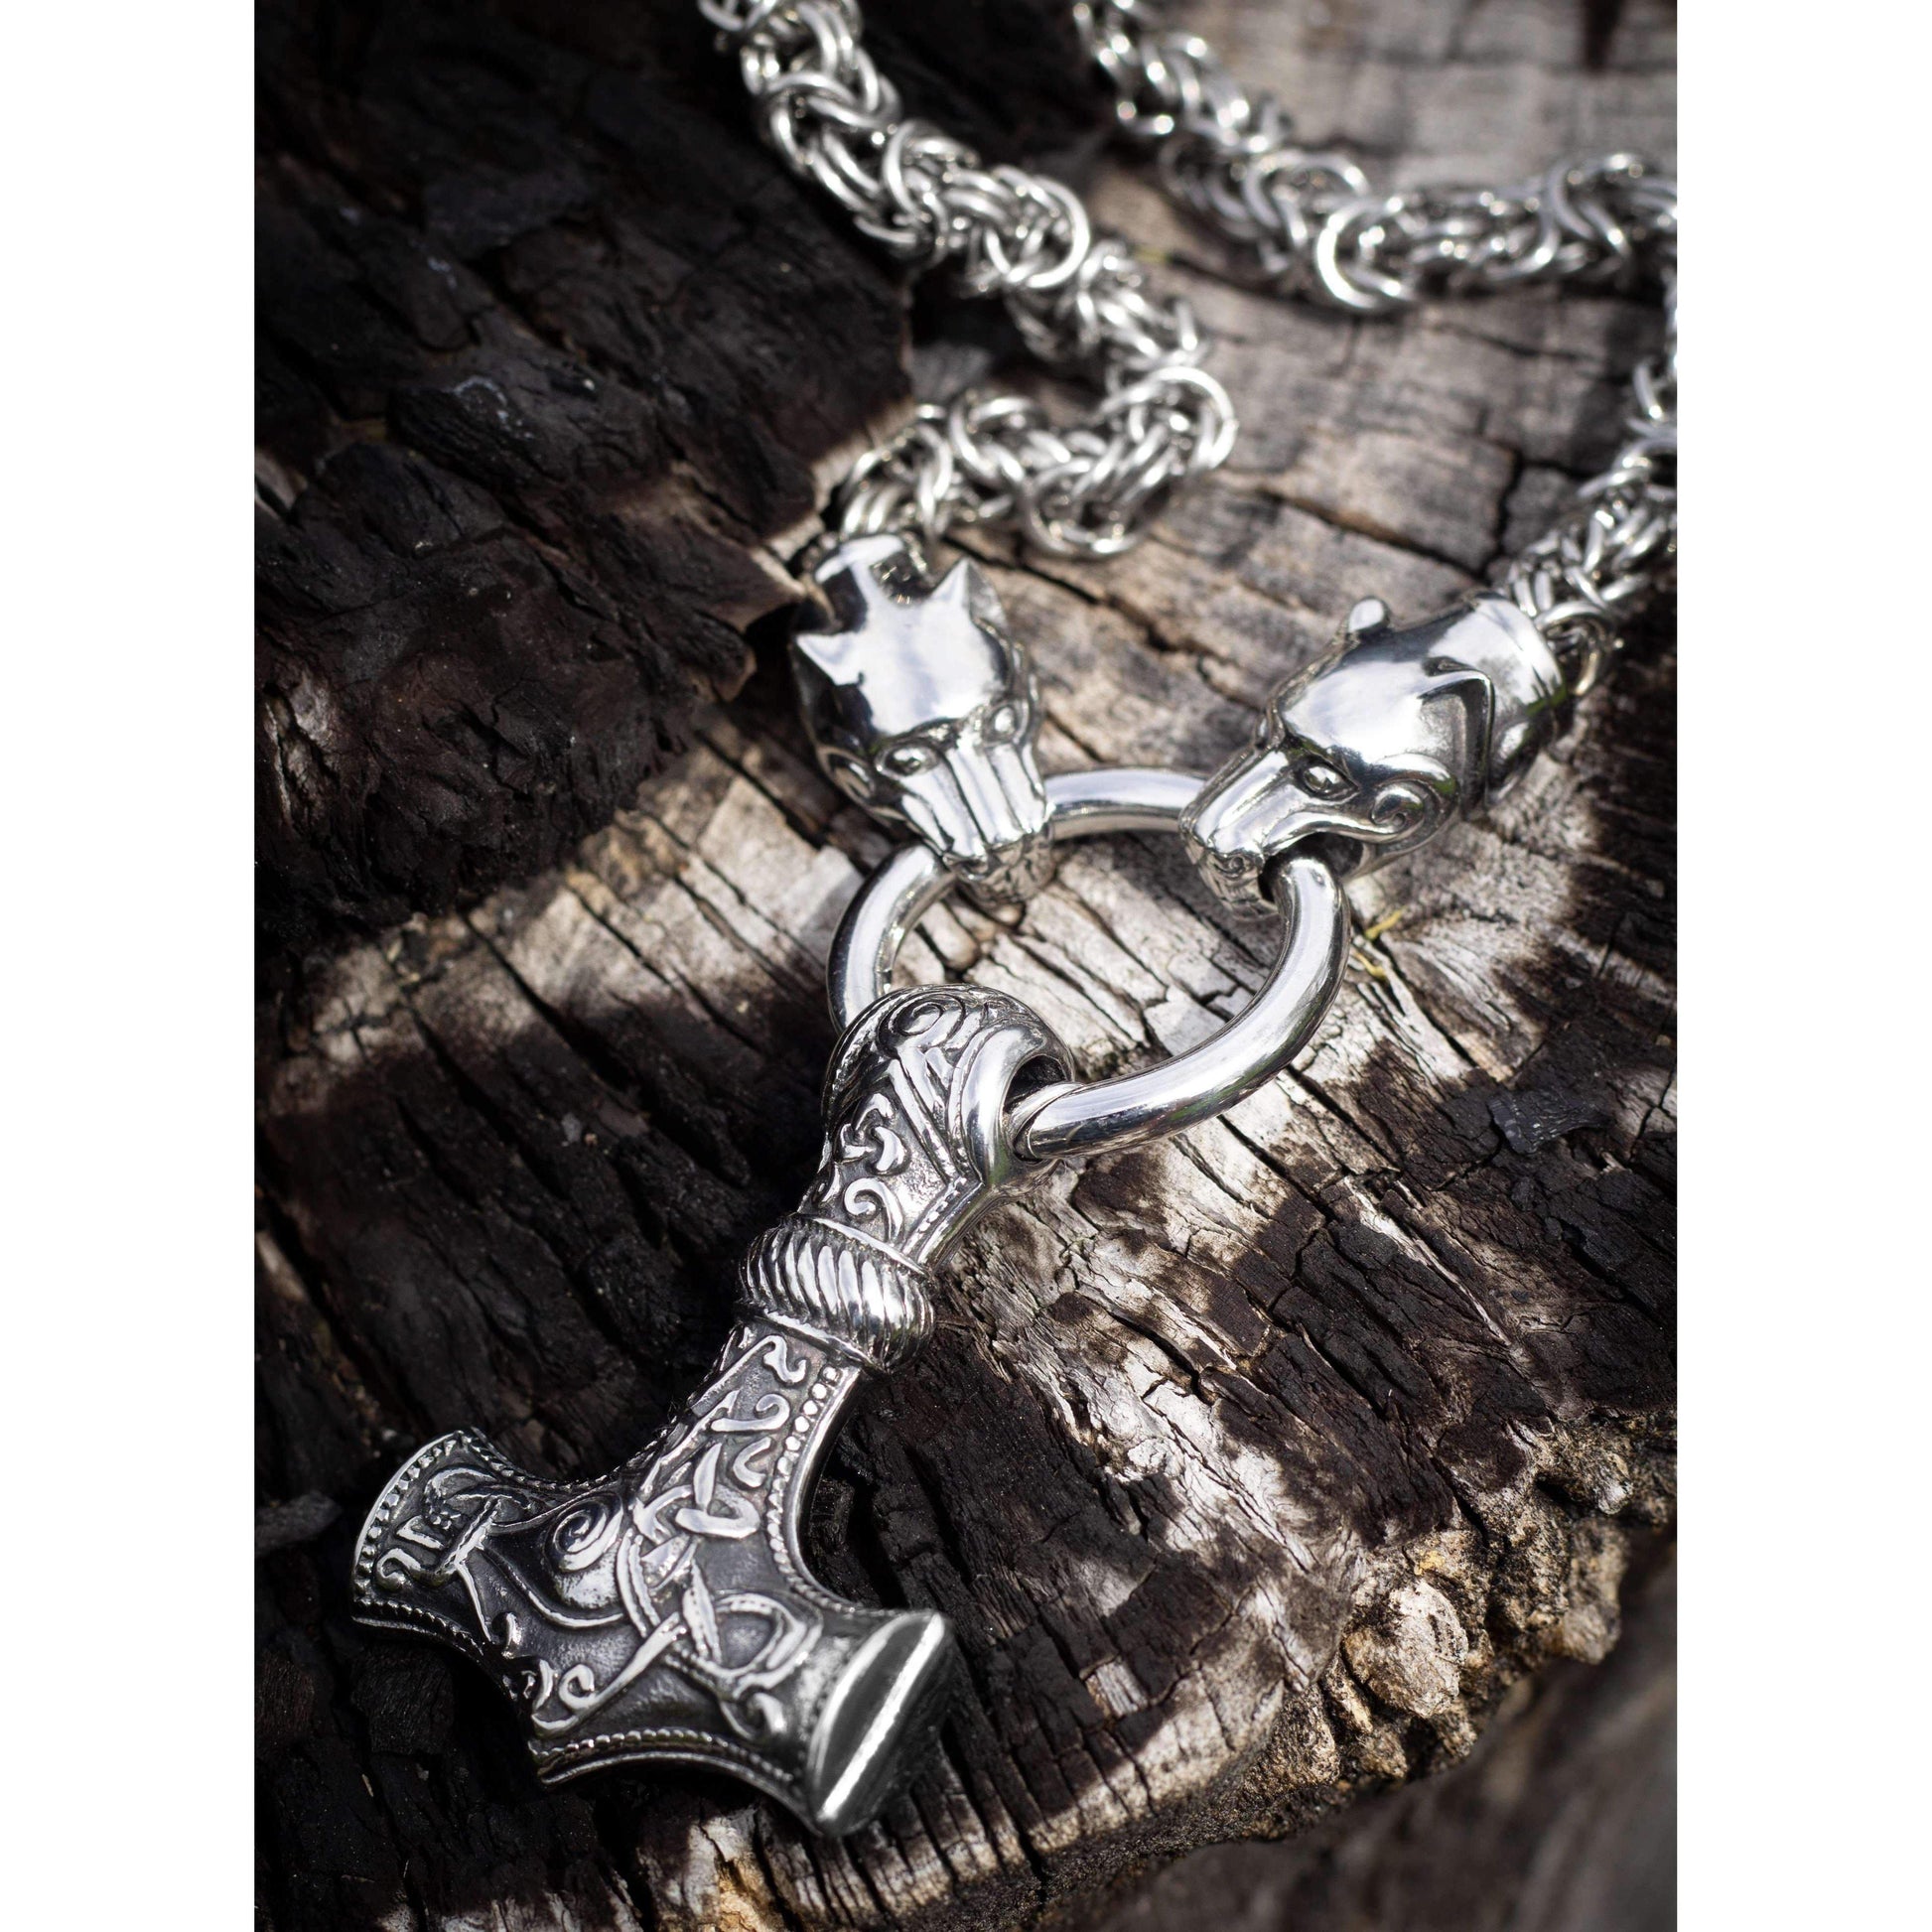 Kings Chain - Merch Wolf with Viking Heads